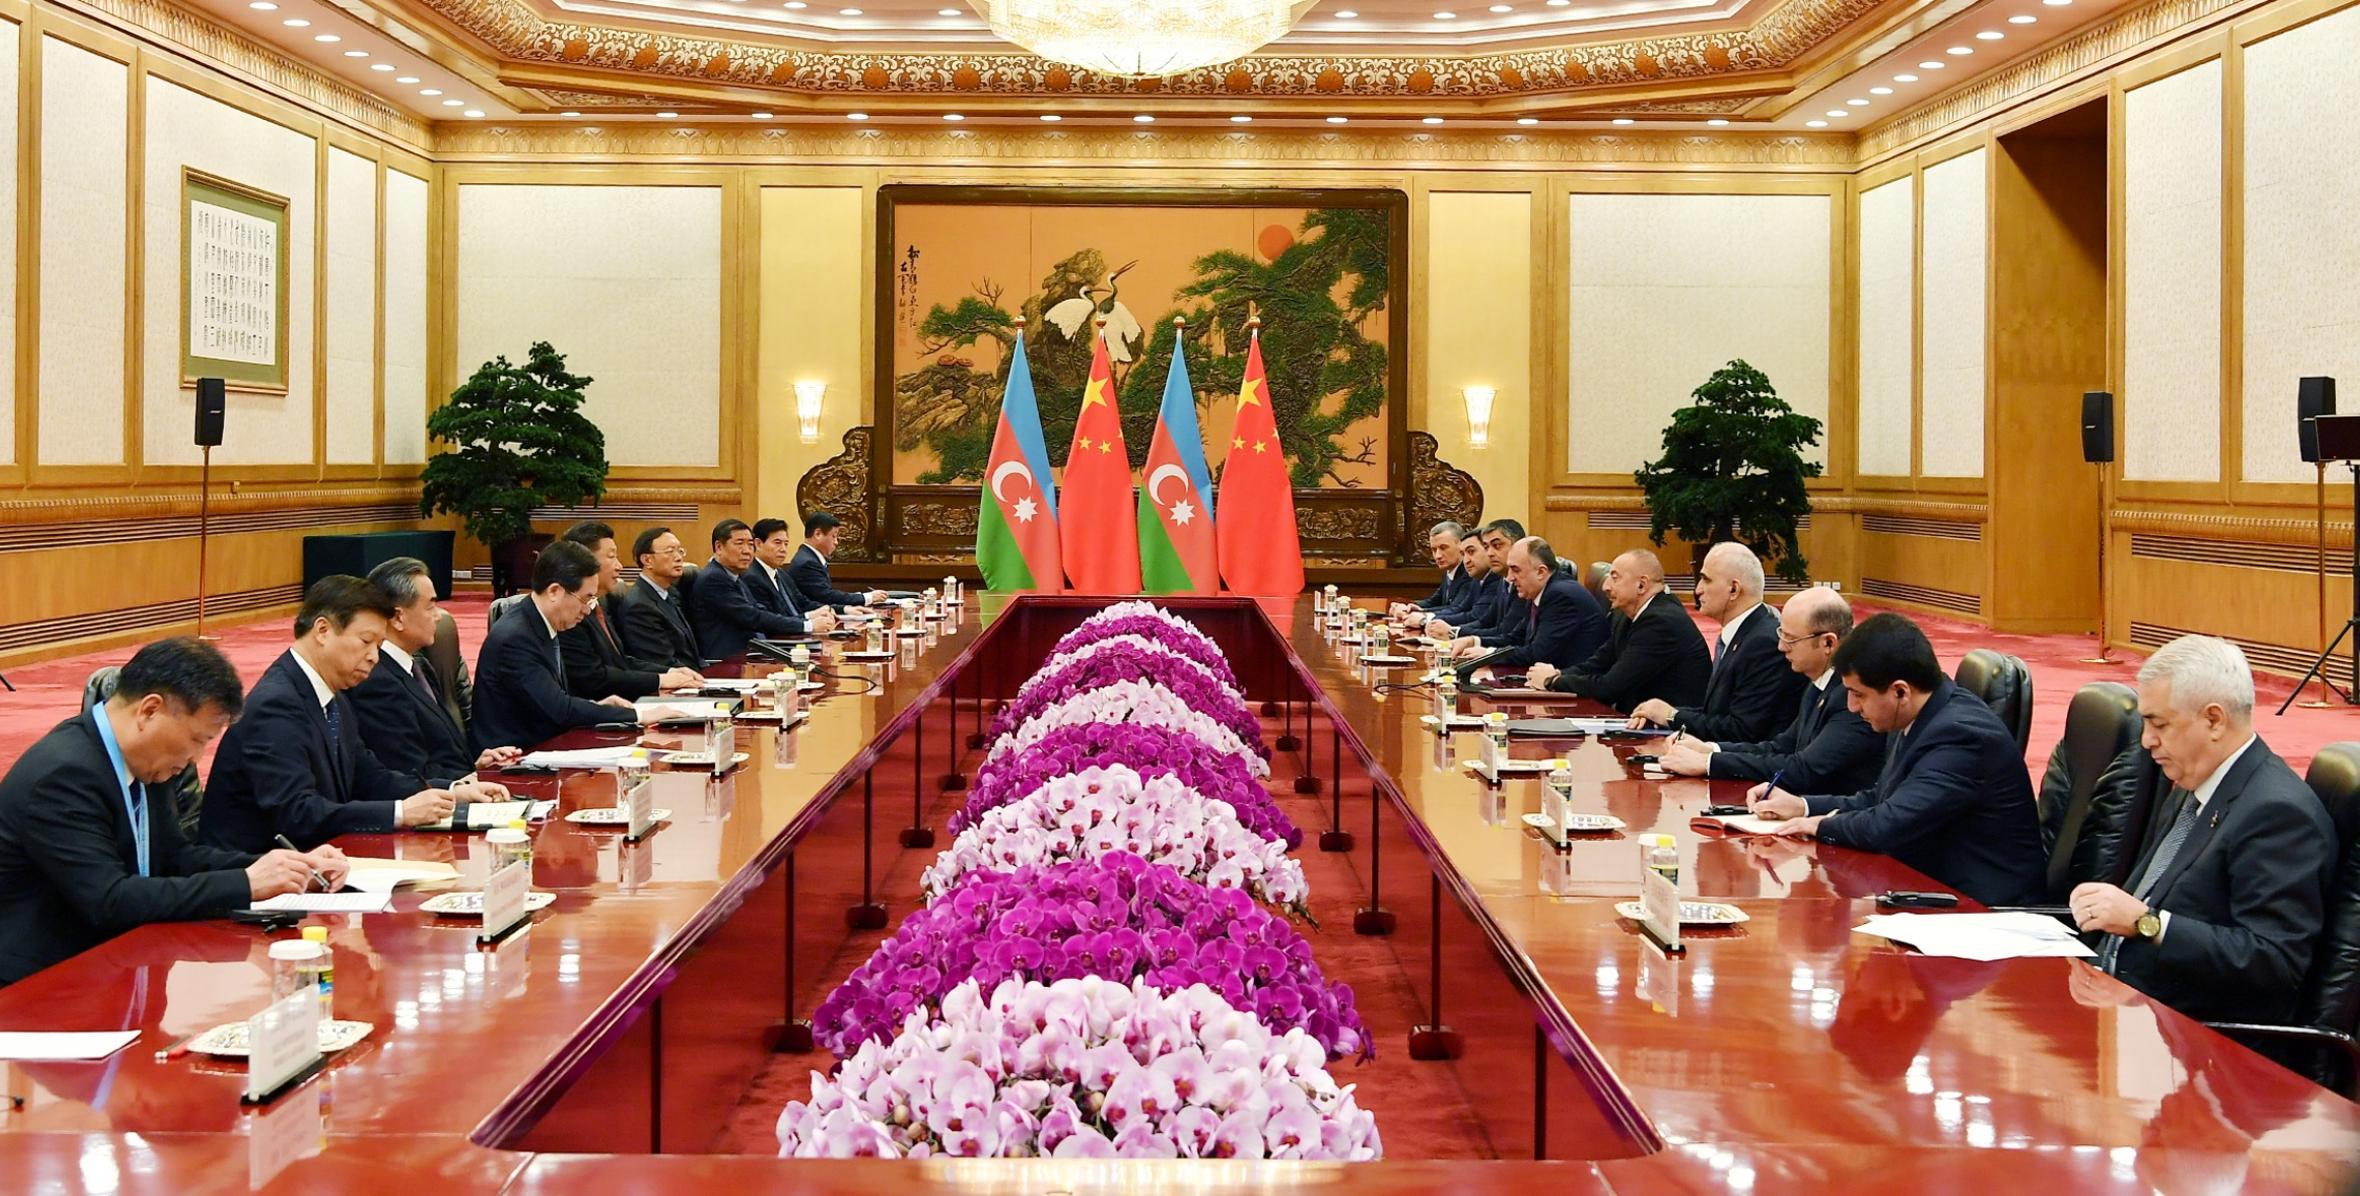 Ilham Aliyev met with Chairman of People's Republic of China Xi Jinping in Beijing